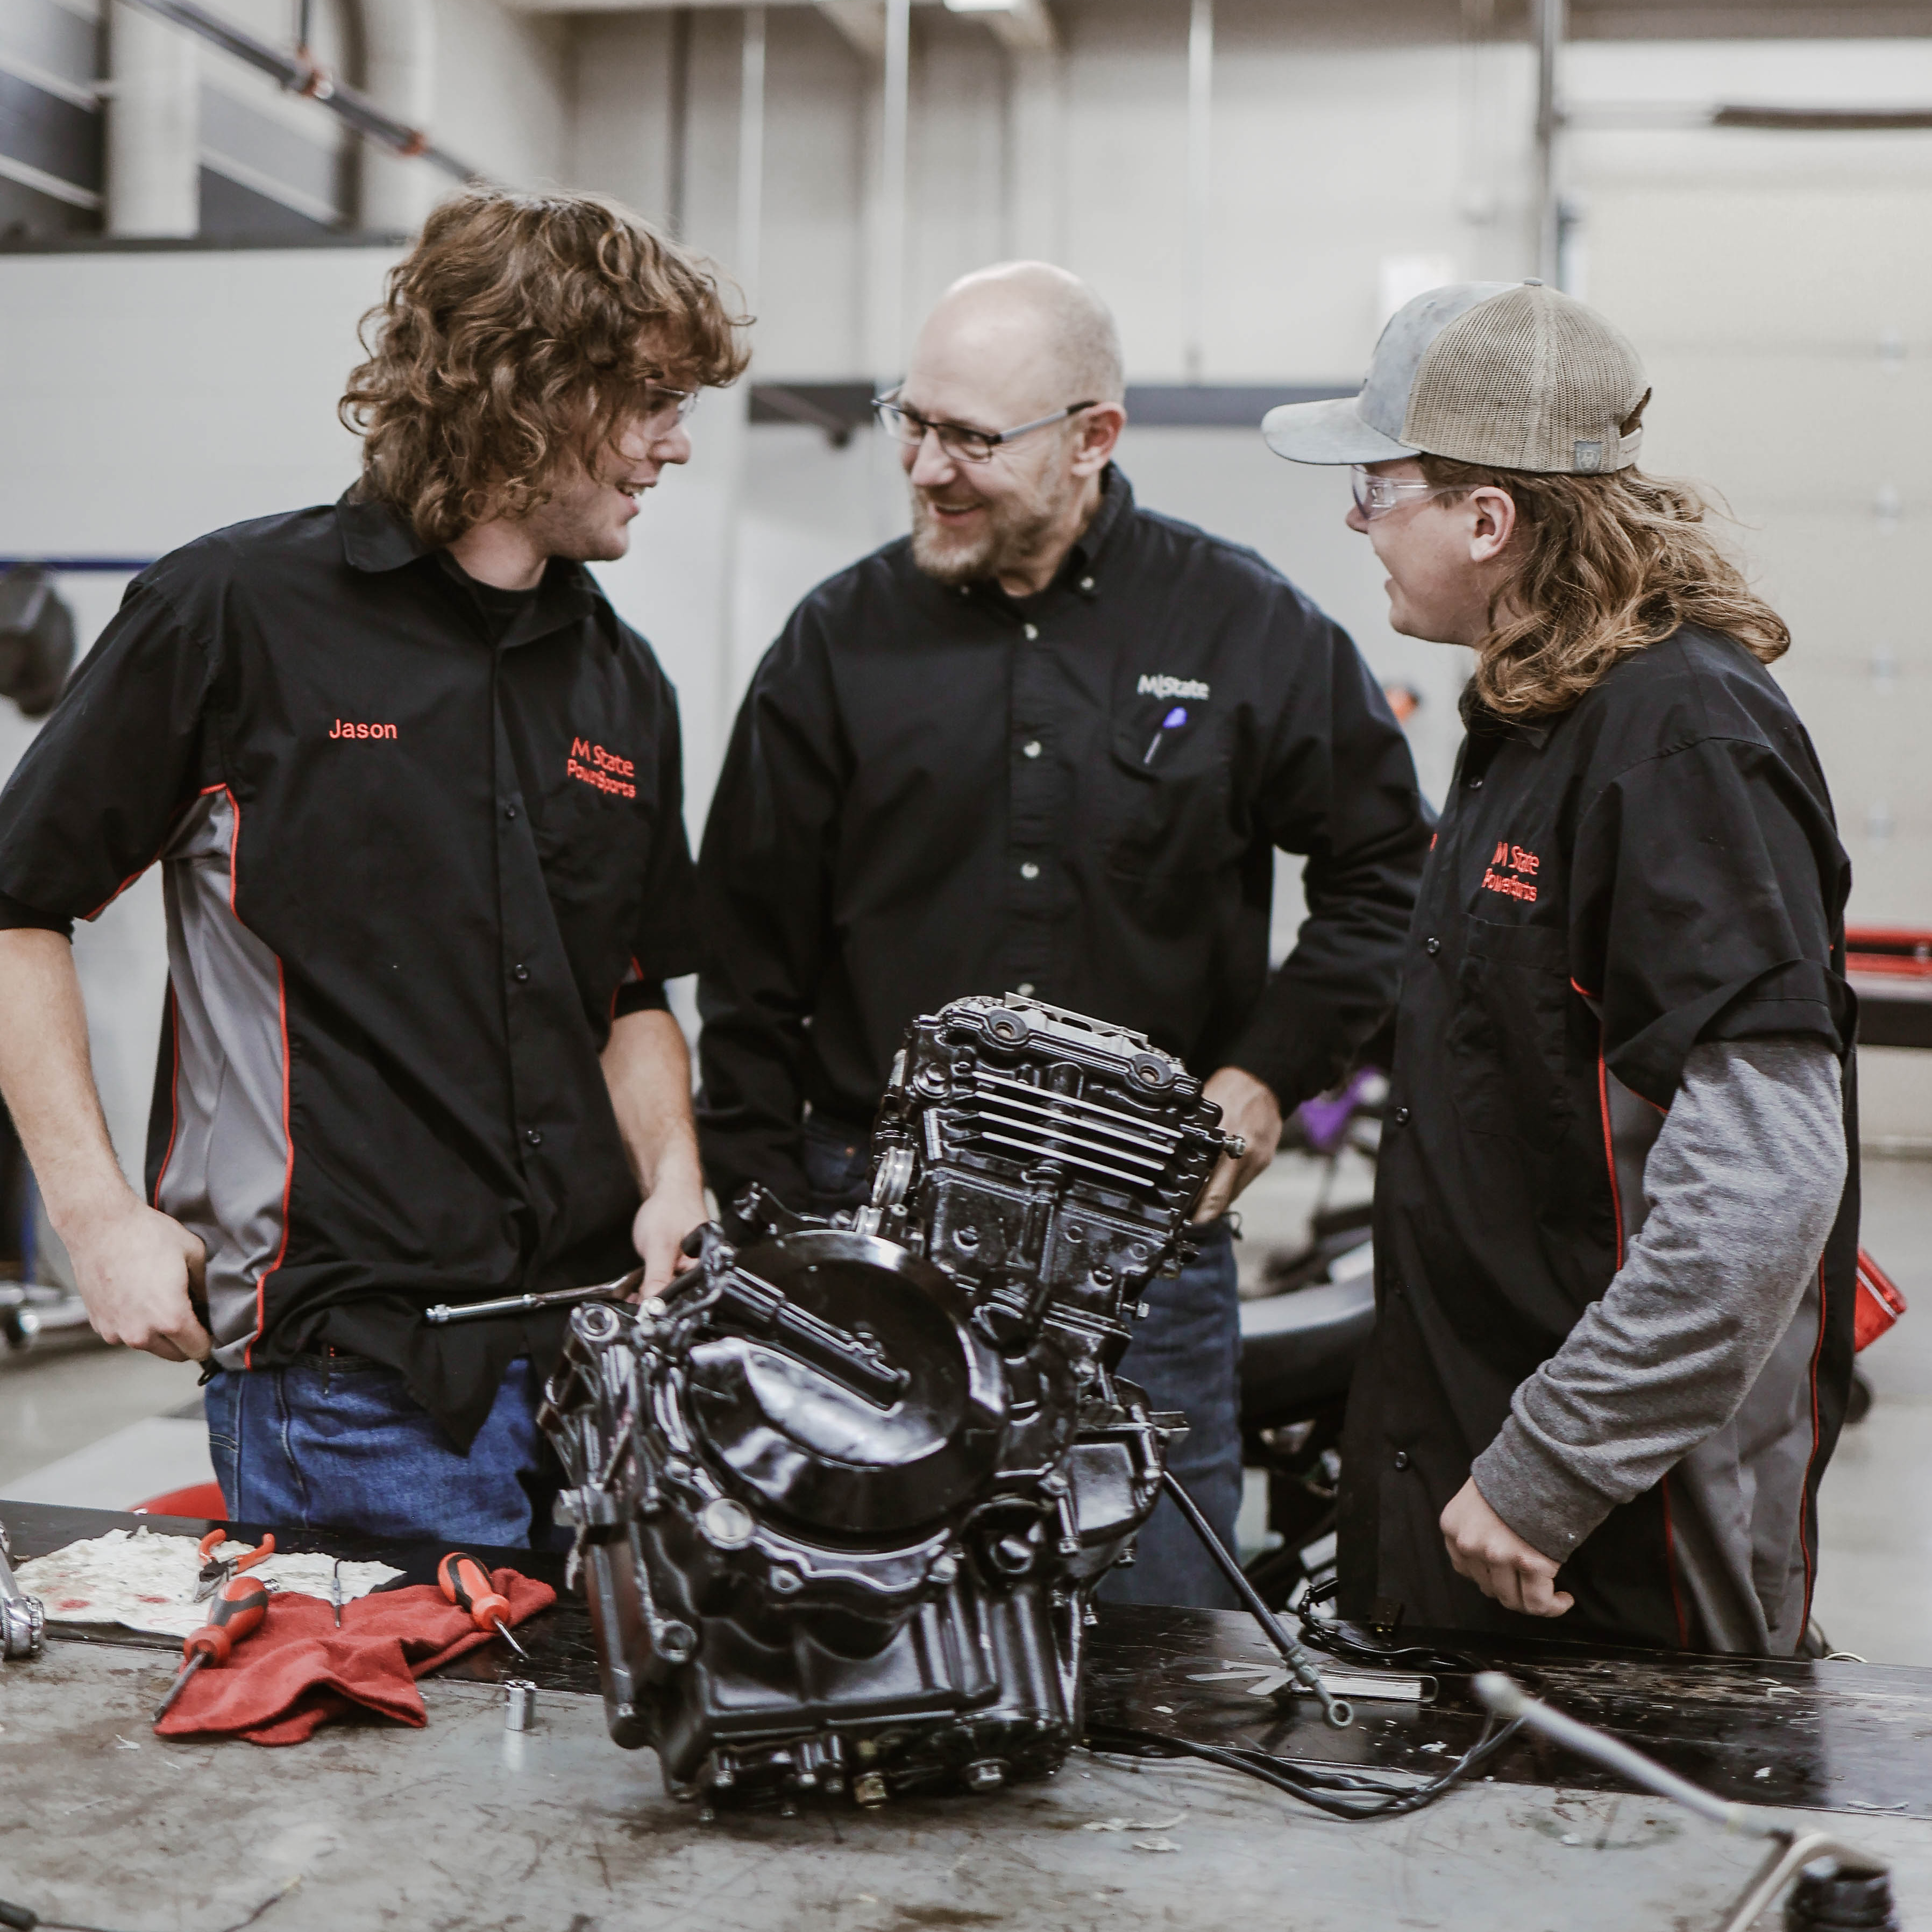 Kent Reisenauer and two PowerSports Technology students laugh during a class in the early 2020s.